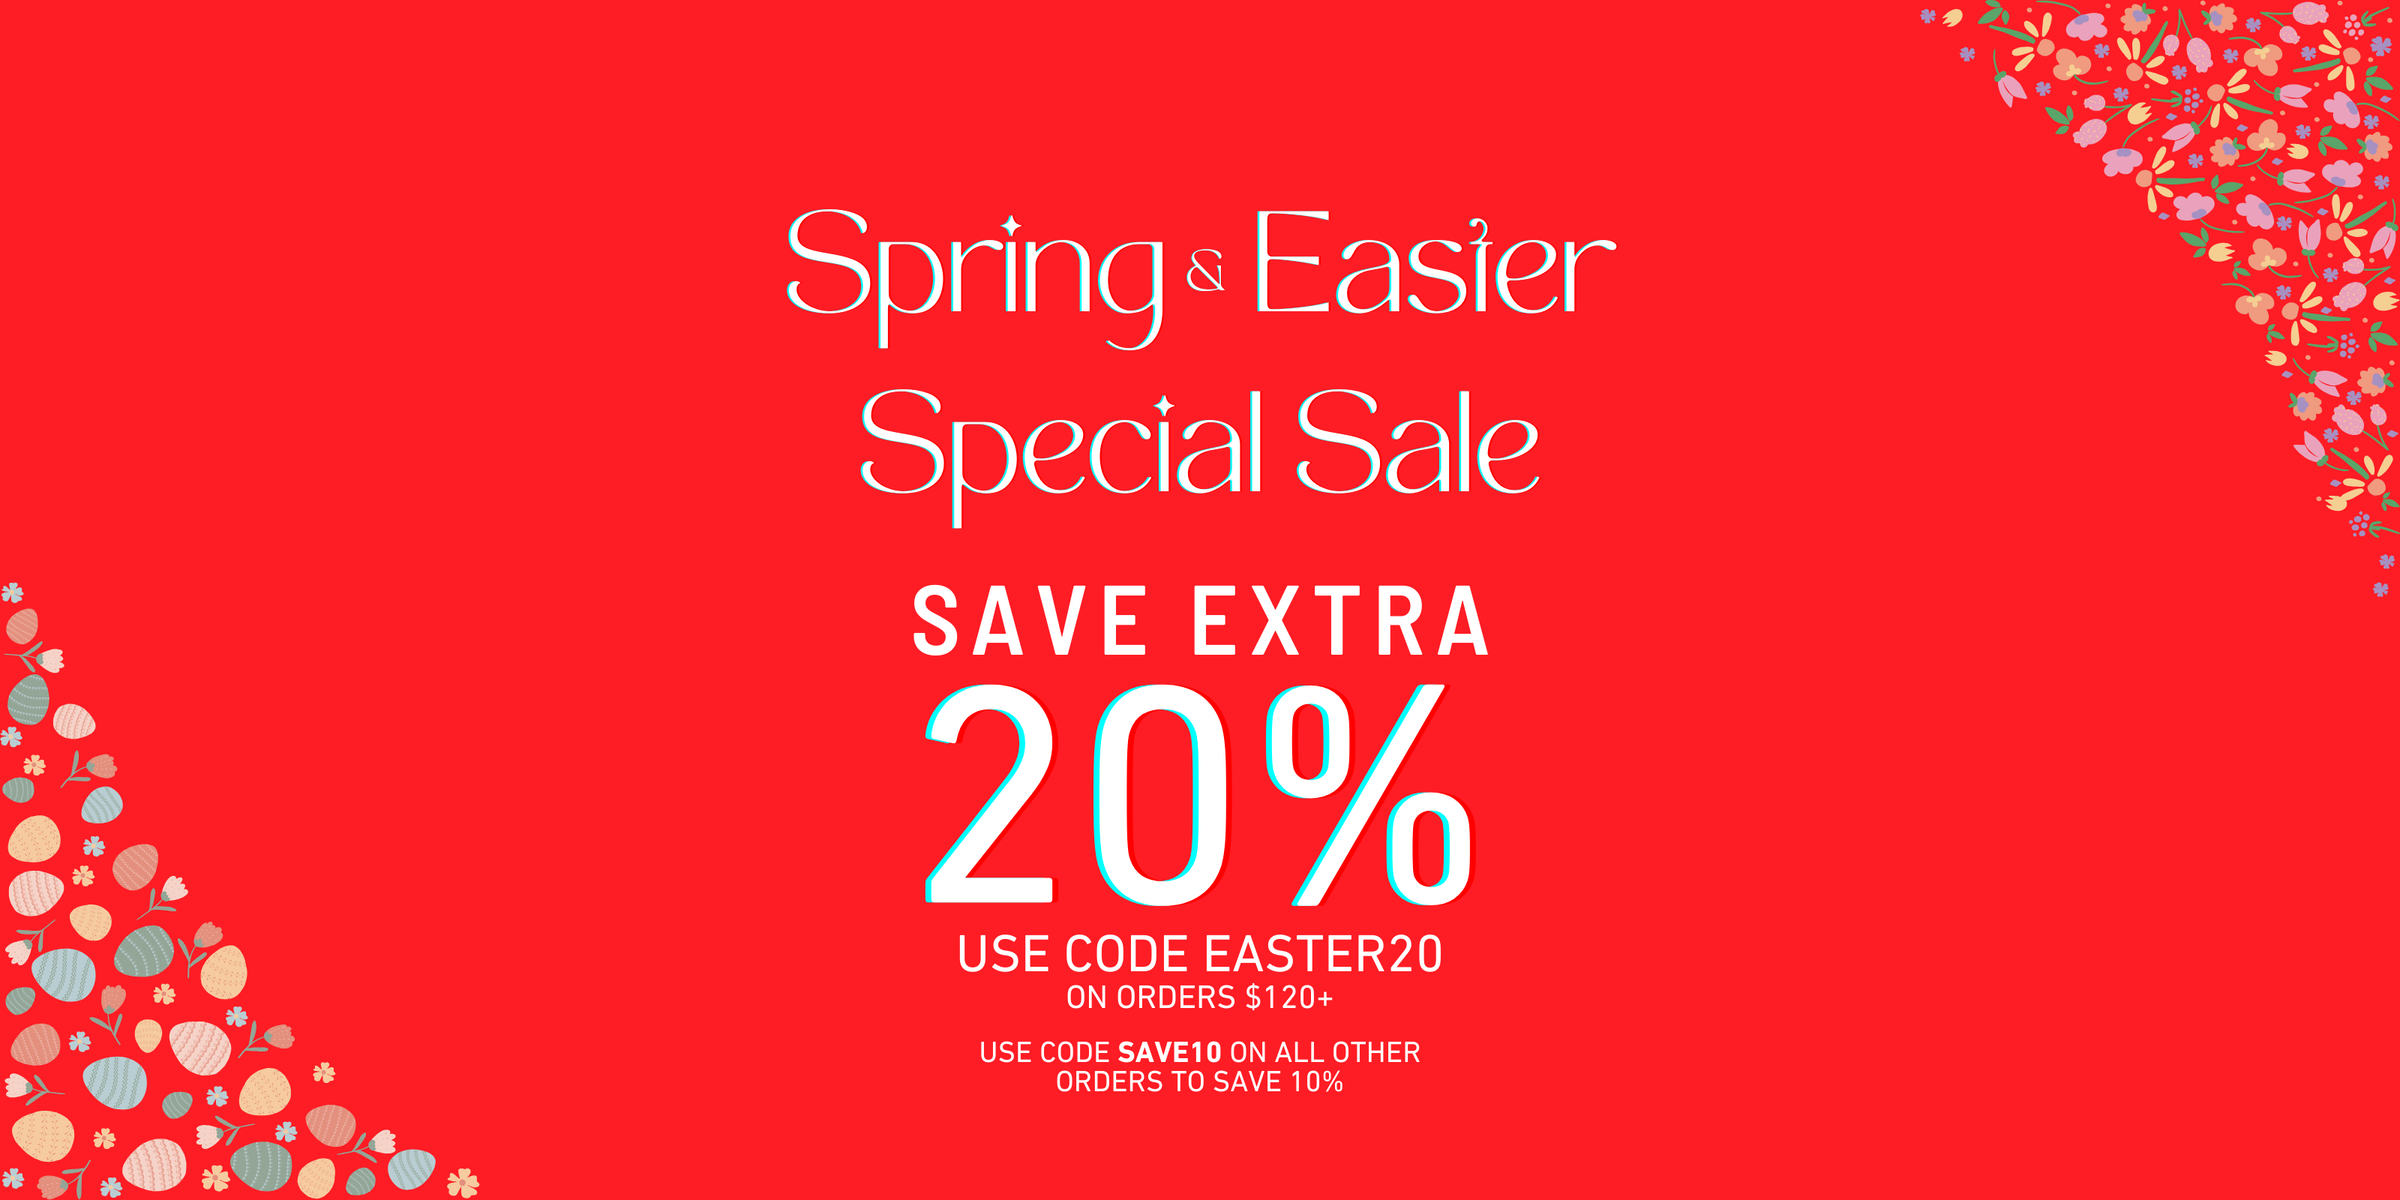 Spring & Easter Special, Save Extra 20% Off Use Code EASTER20 On Orders Over $120, or Use Code Save10 On All Other Orders To Save 10%